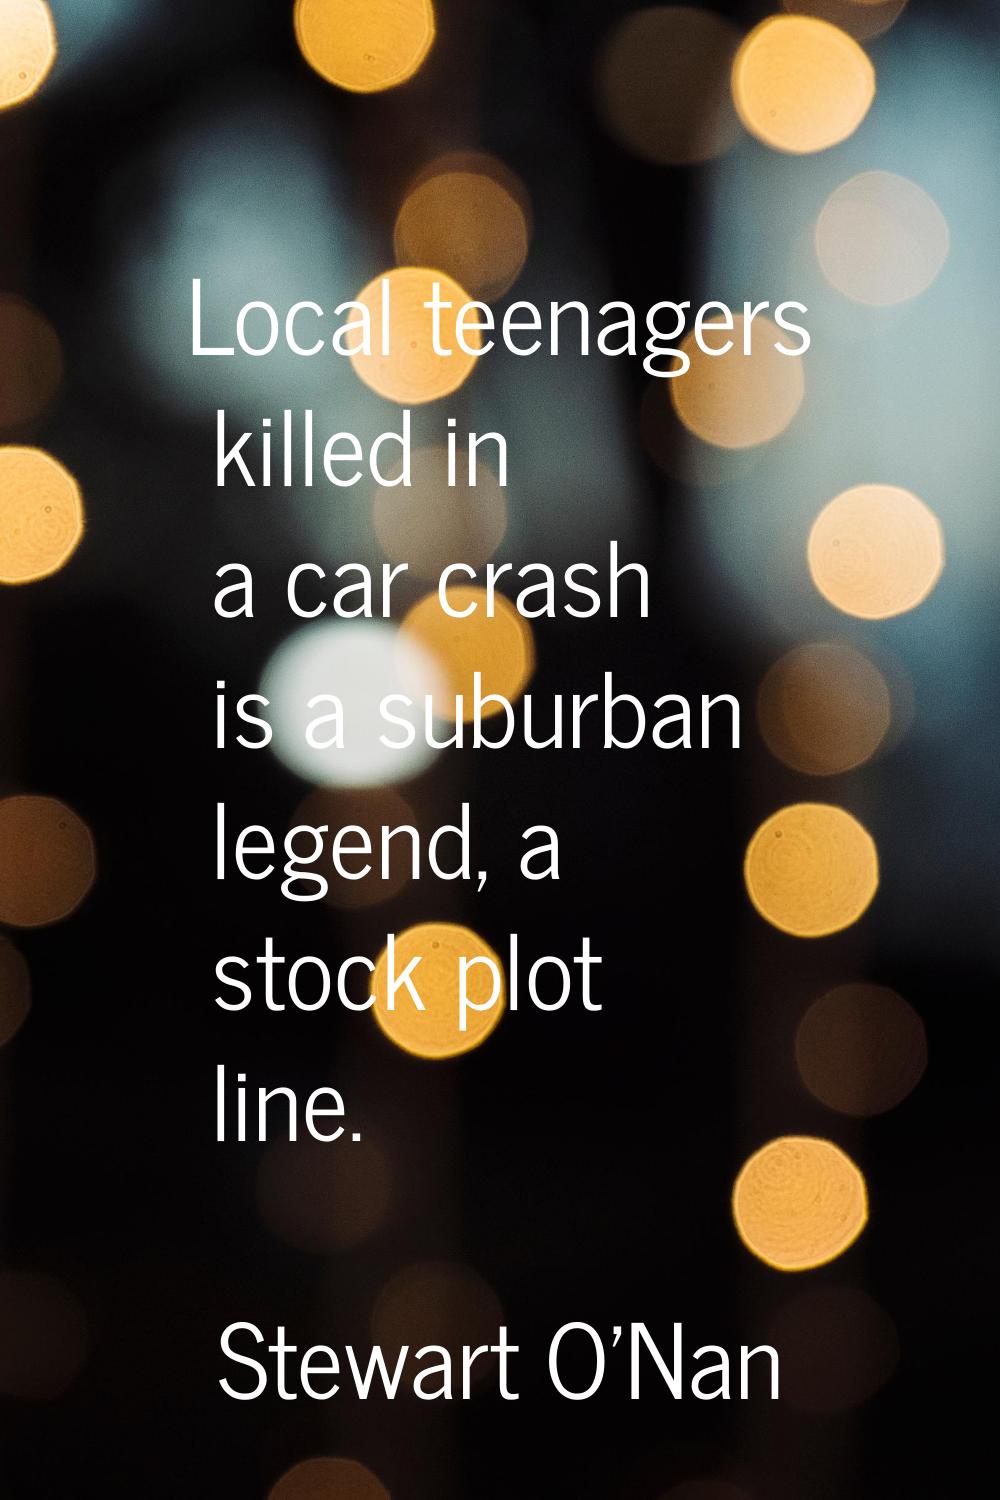 Local teenagers killed in a car crash is a suburban legend, a stock plot line.